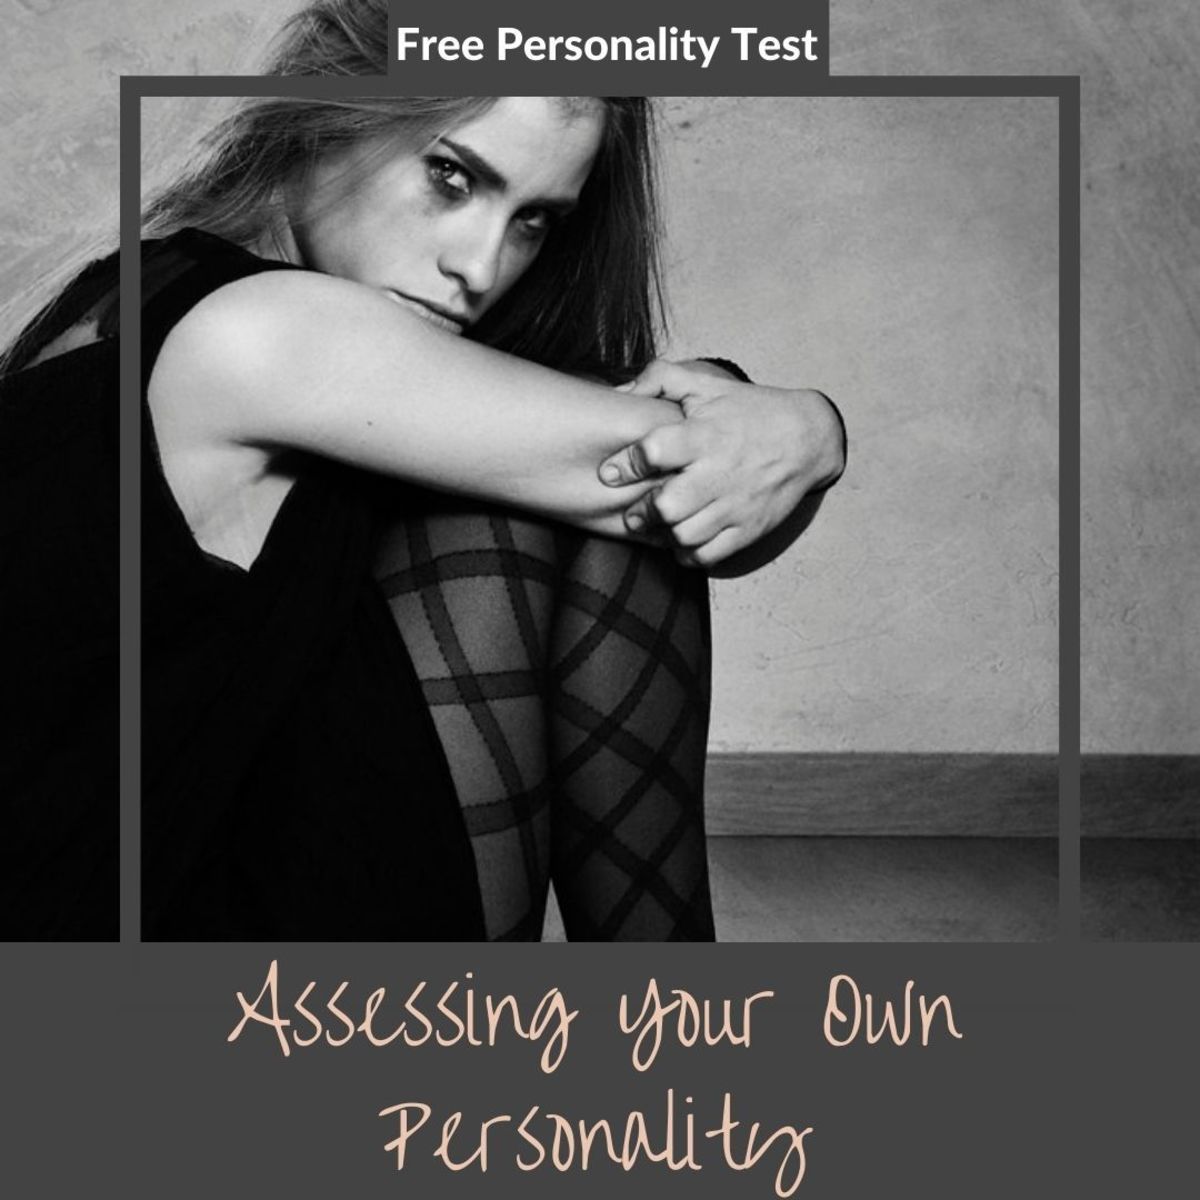 Self-Assessment Tests on Your Personality for 'Disclosure and Concealment' and 'Locus of Control'